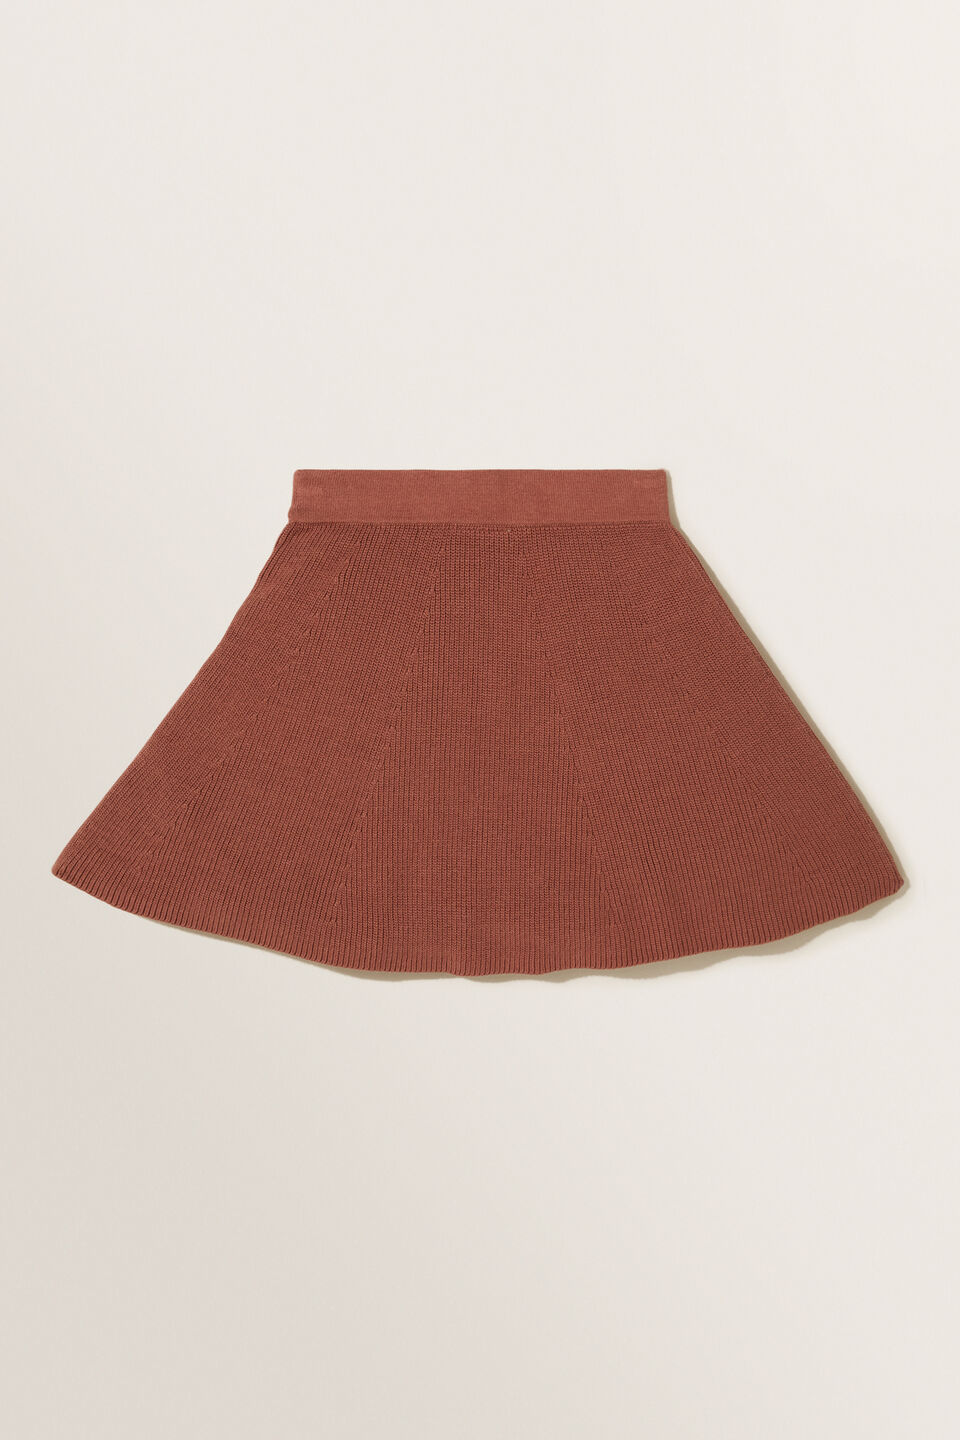 Knit Skirt  Cocoa